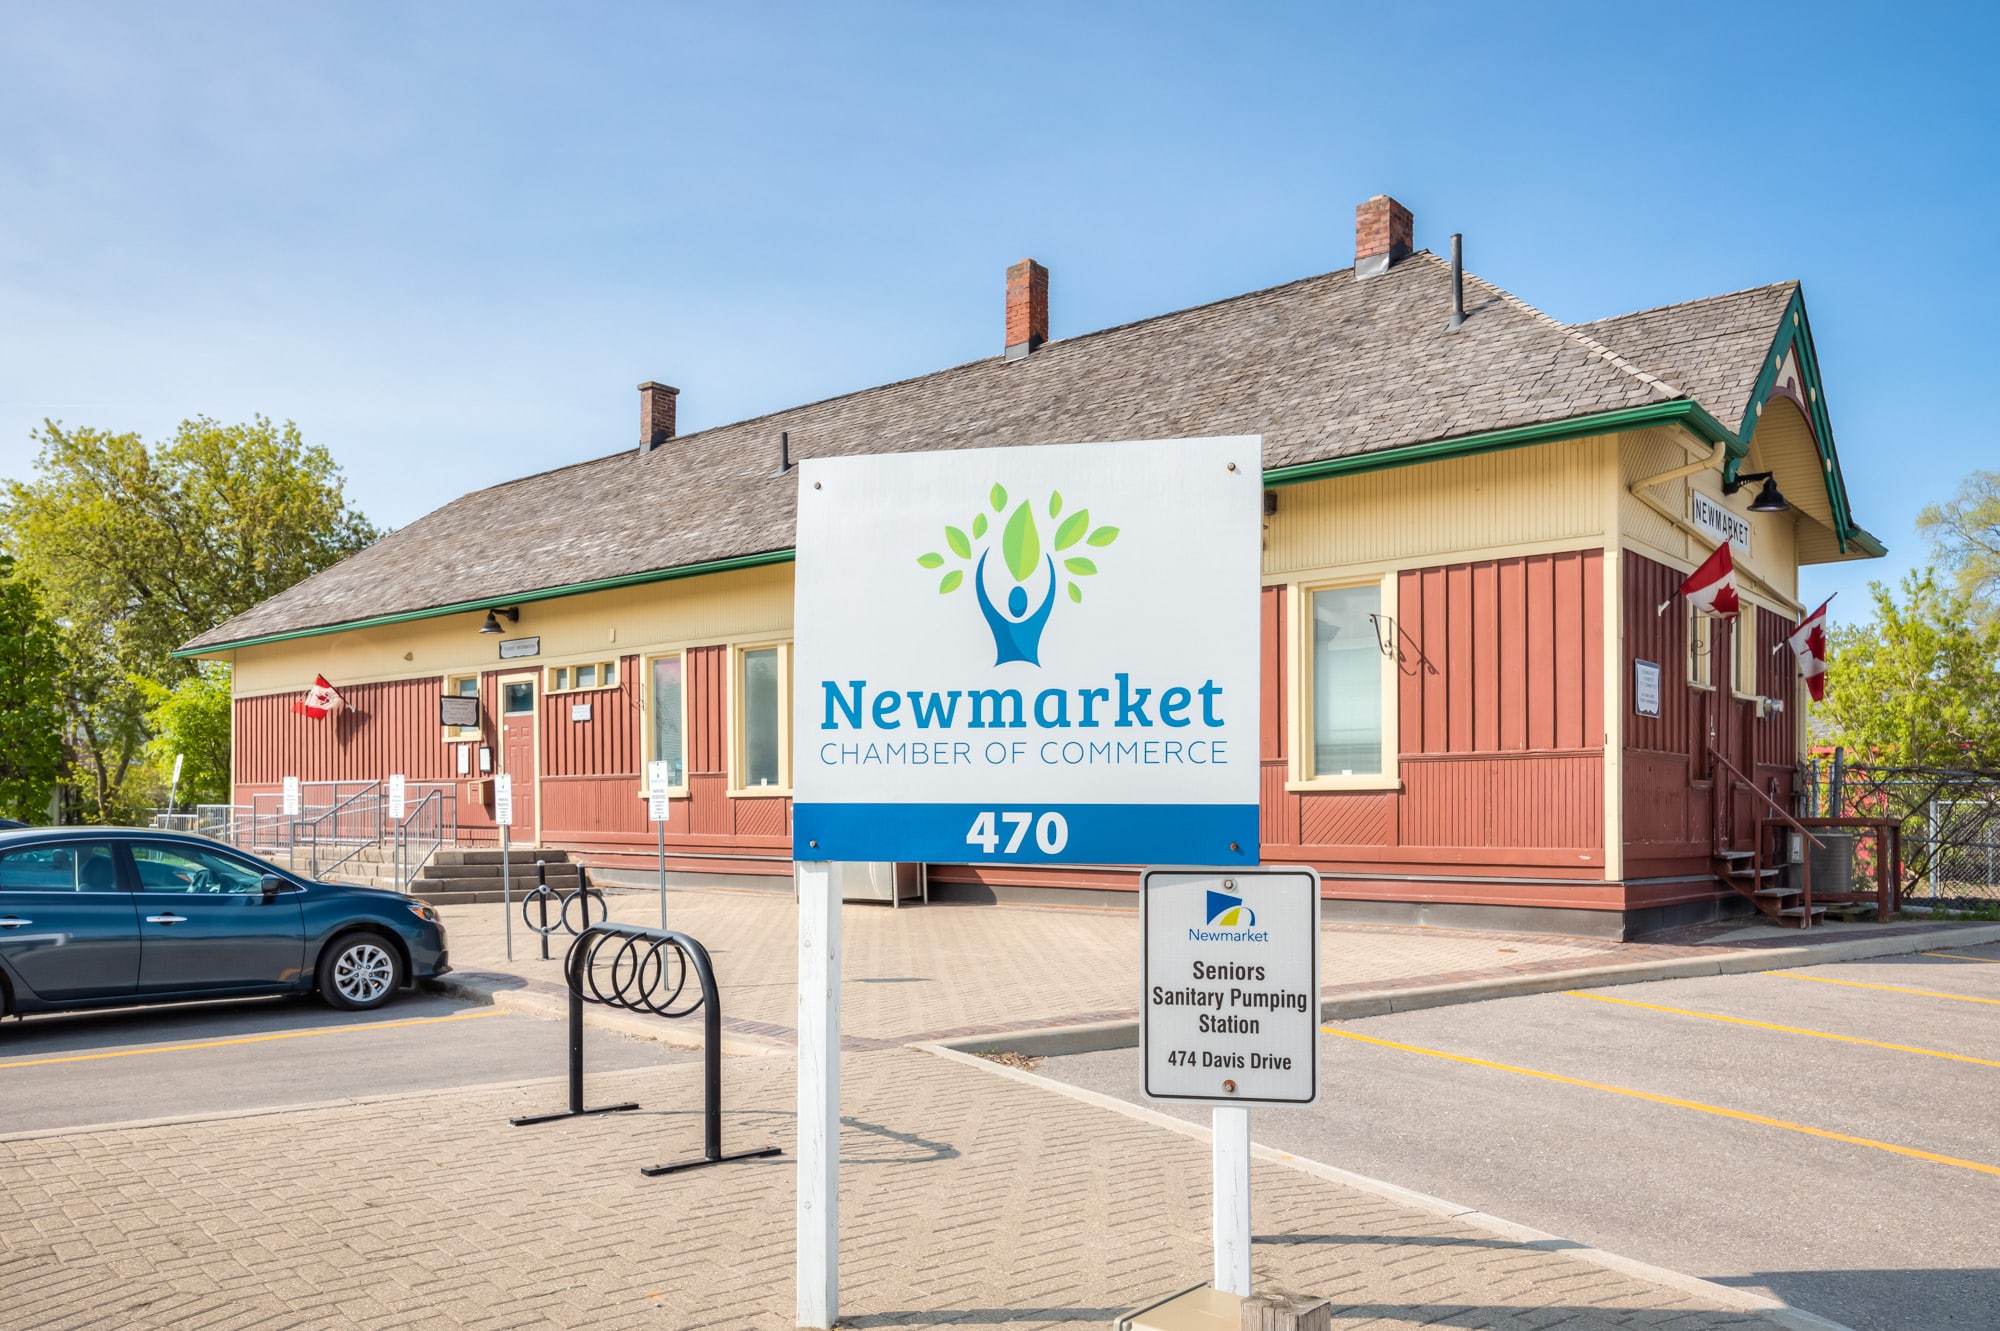 Newmarket Chamber of Commerce Interior Design and Office design